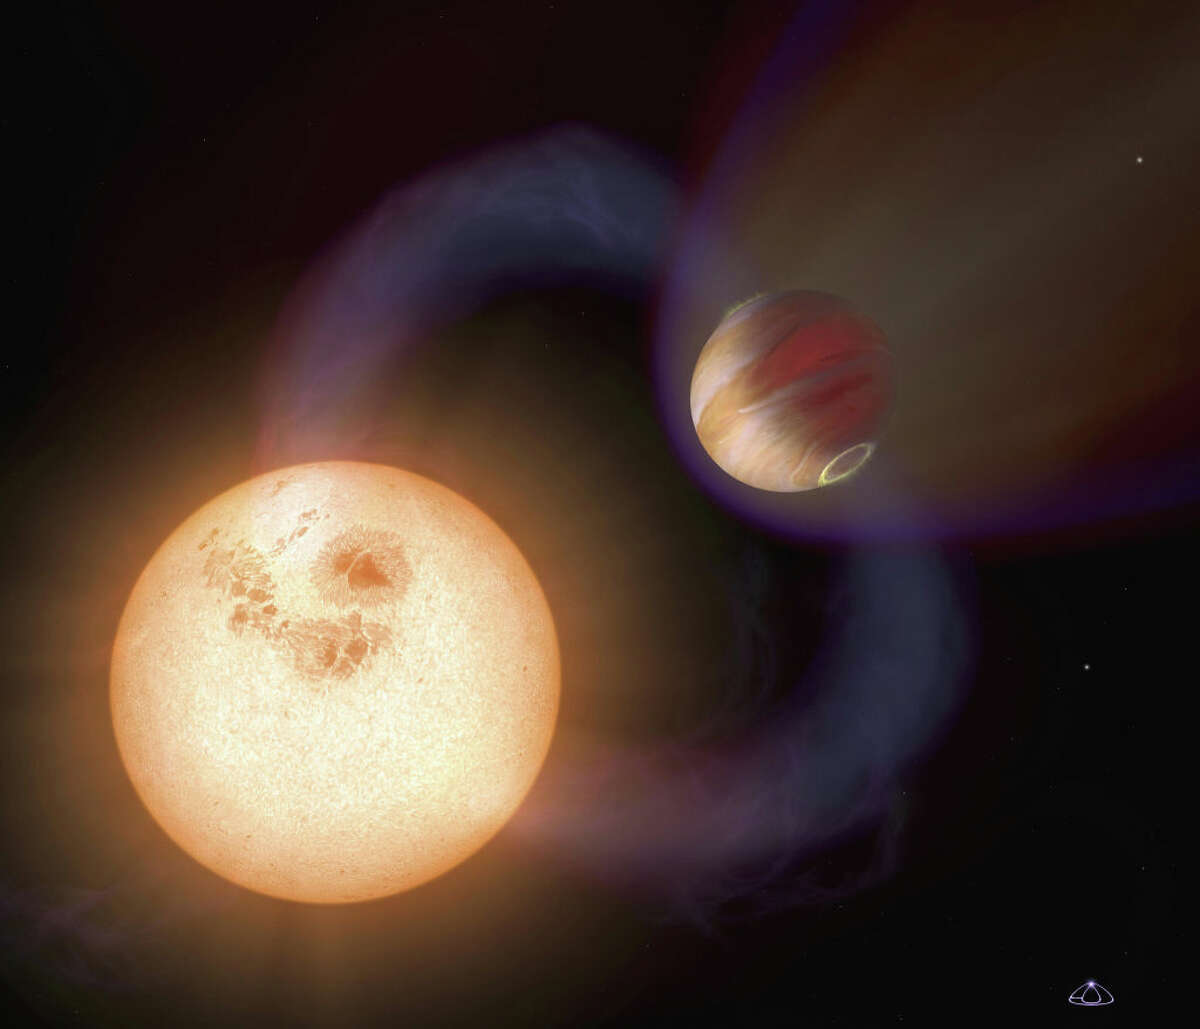 new hubble pictures of planets